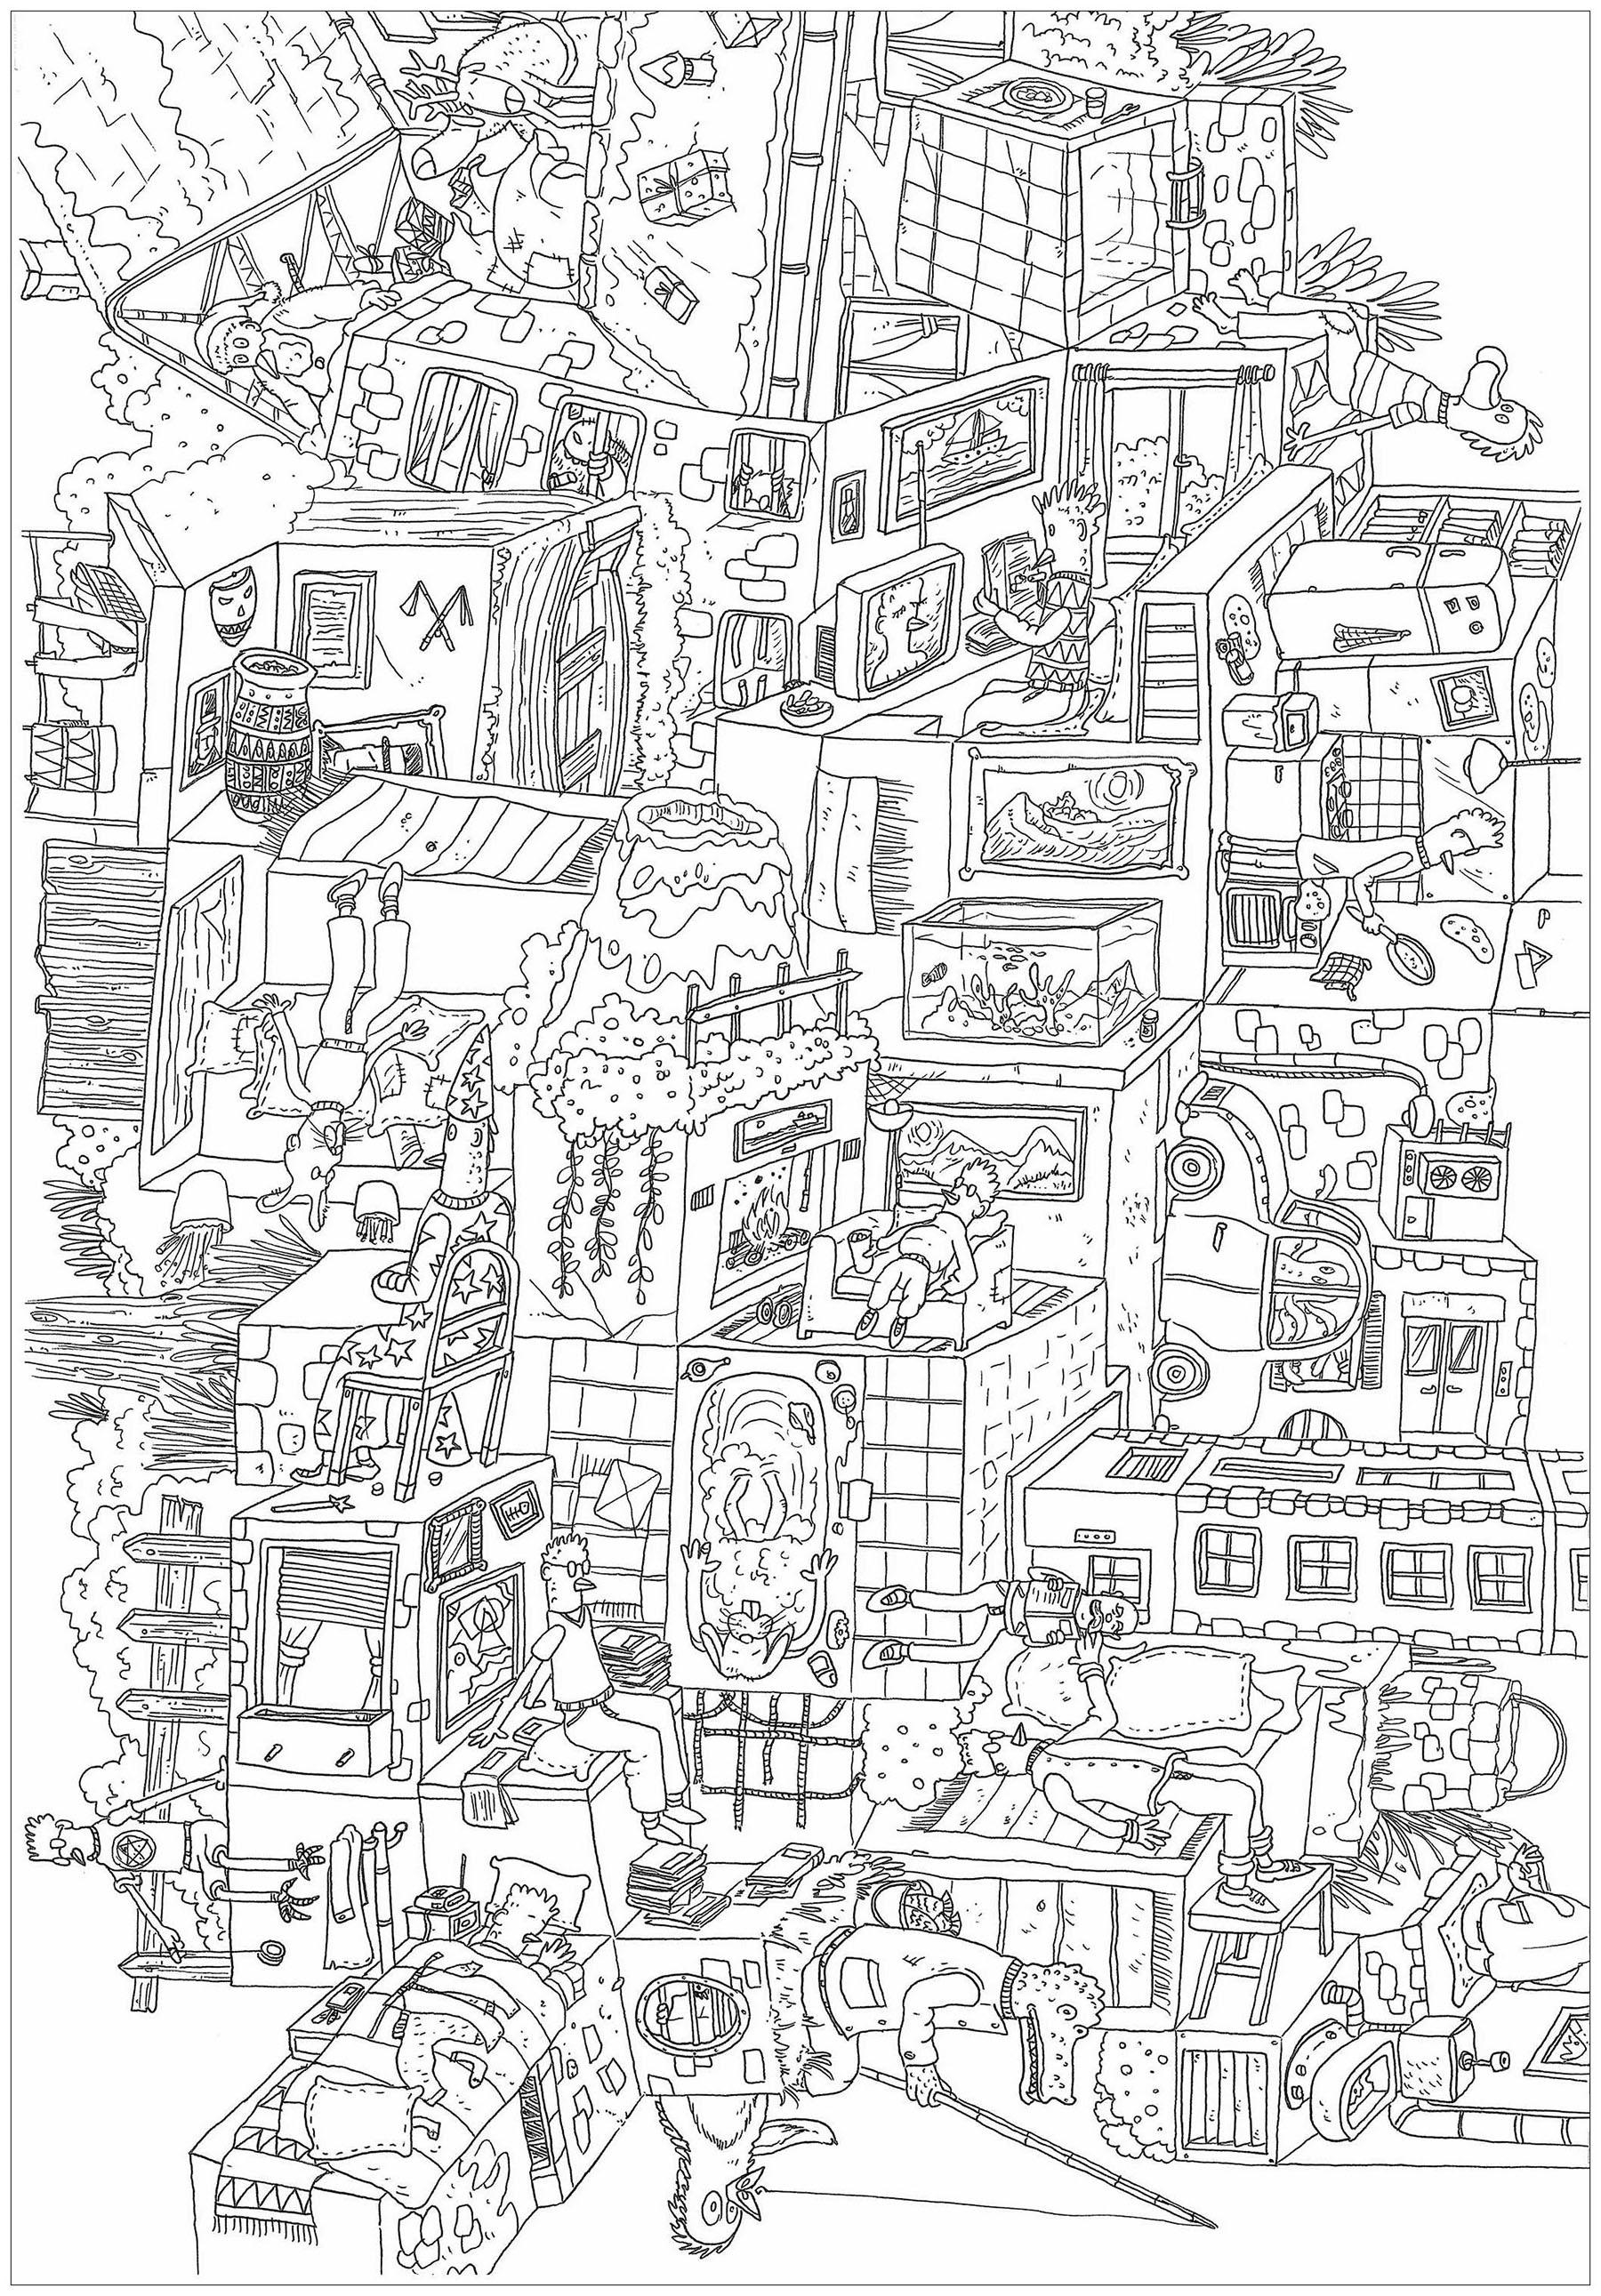 'Meli melo', a complex coloring page, 'Where is Waldo ?' style, Artist : Frédéric Brogard